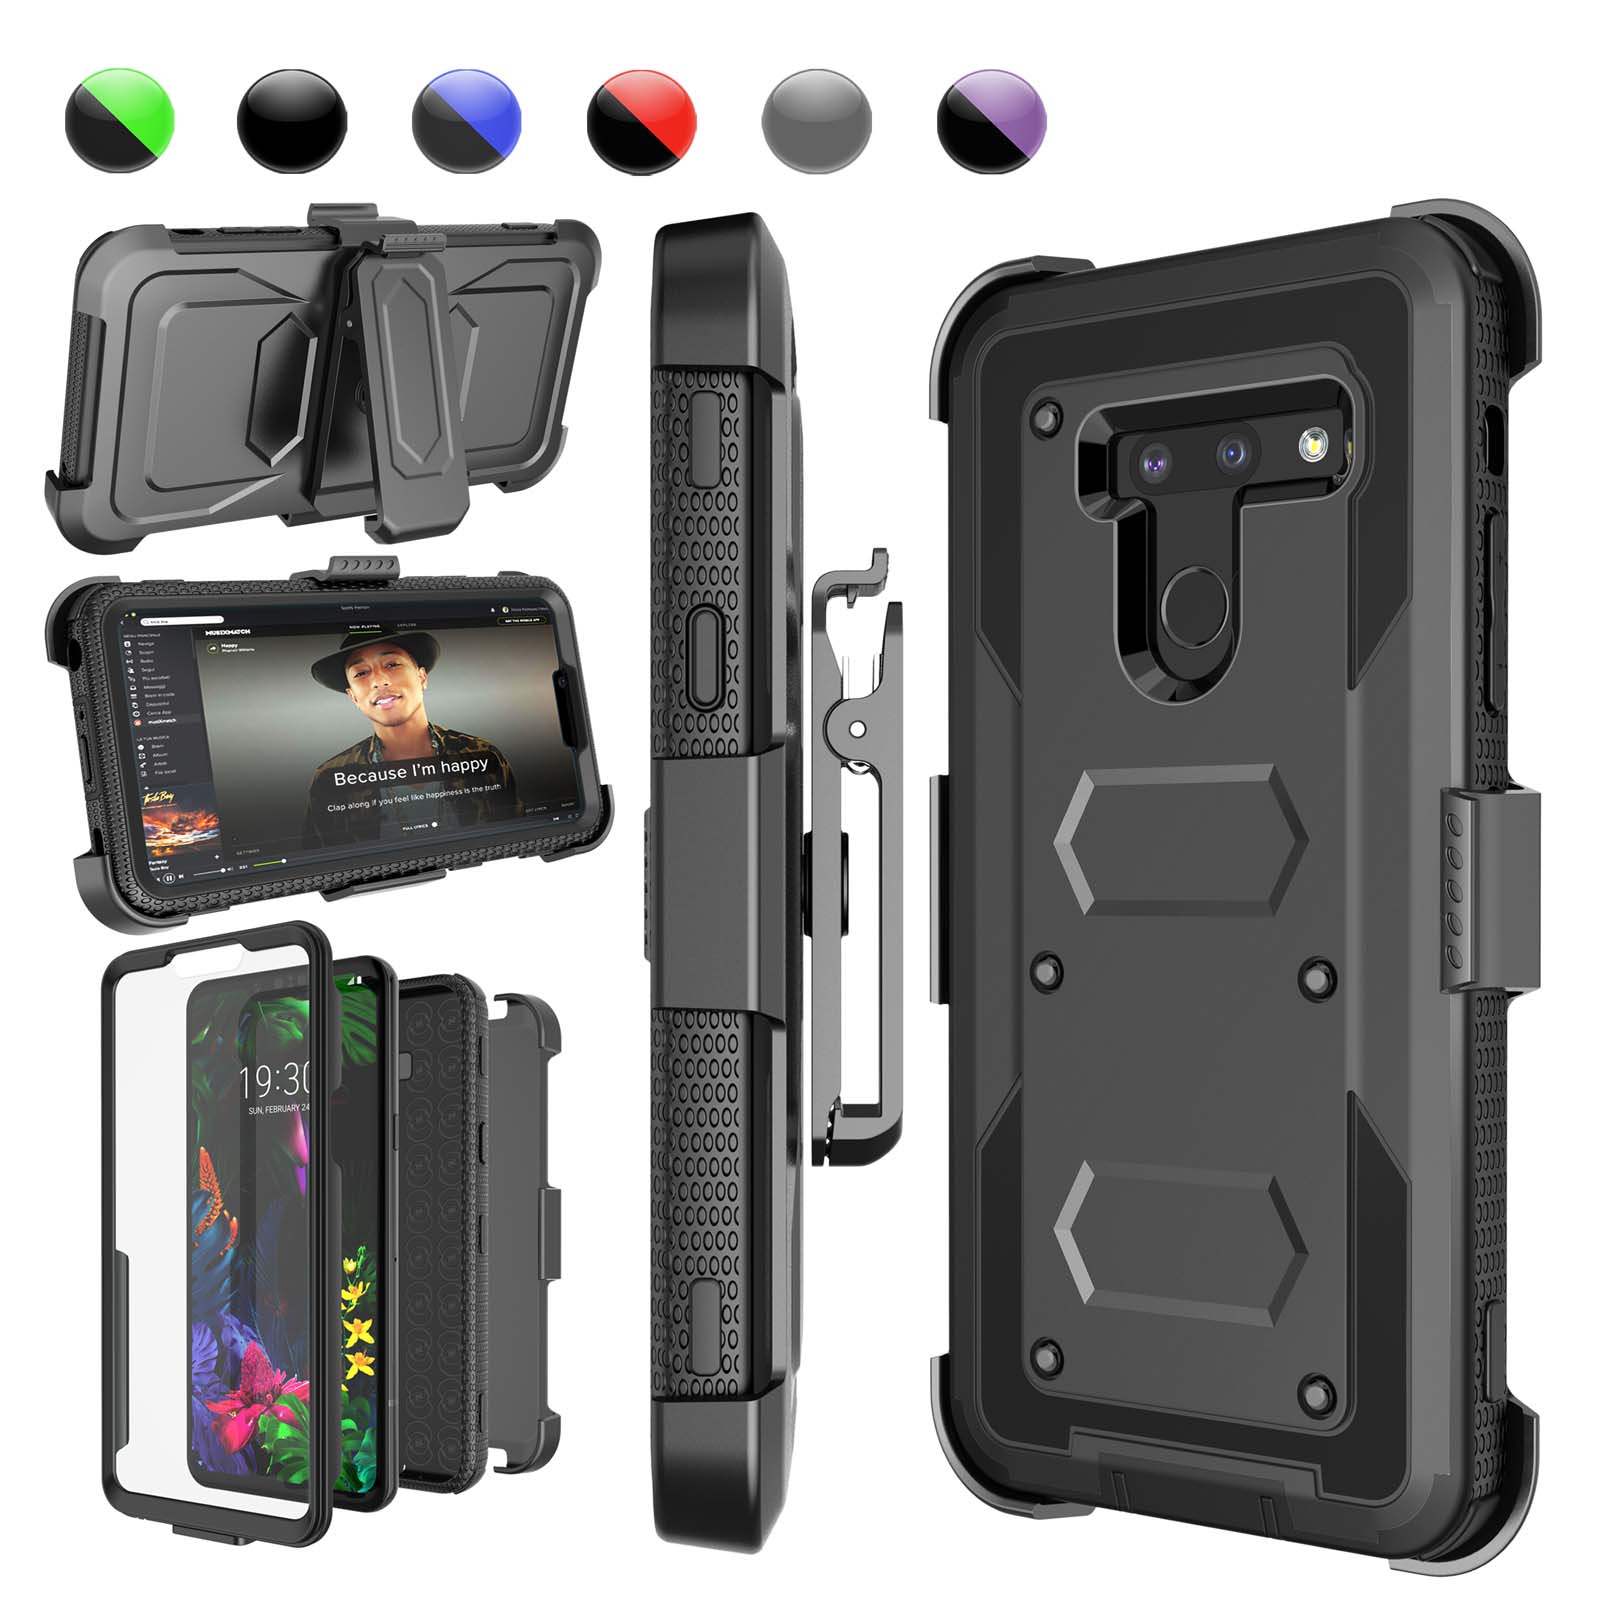 OtterBox Defender Series Case and Holster for LG G8 ThinQ Black